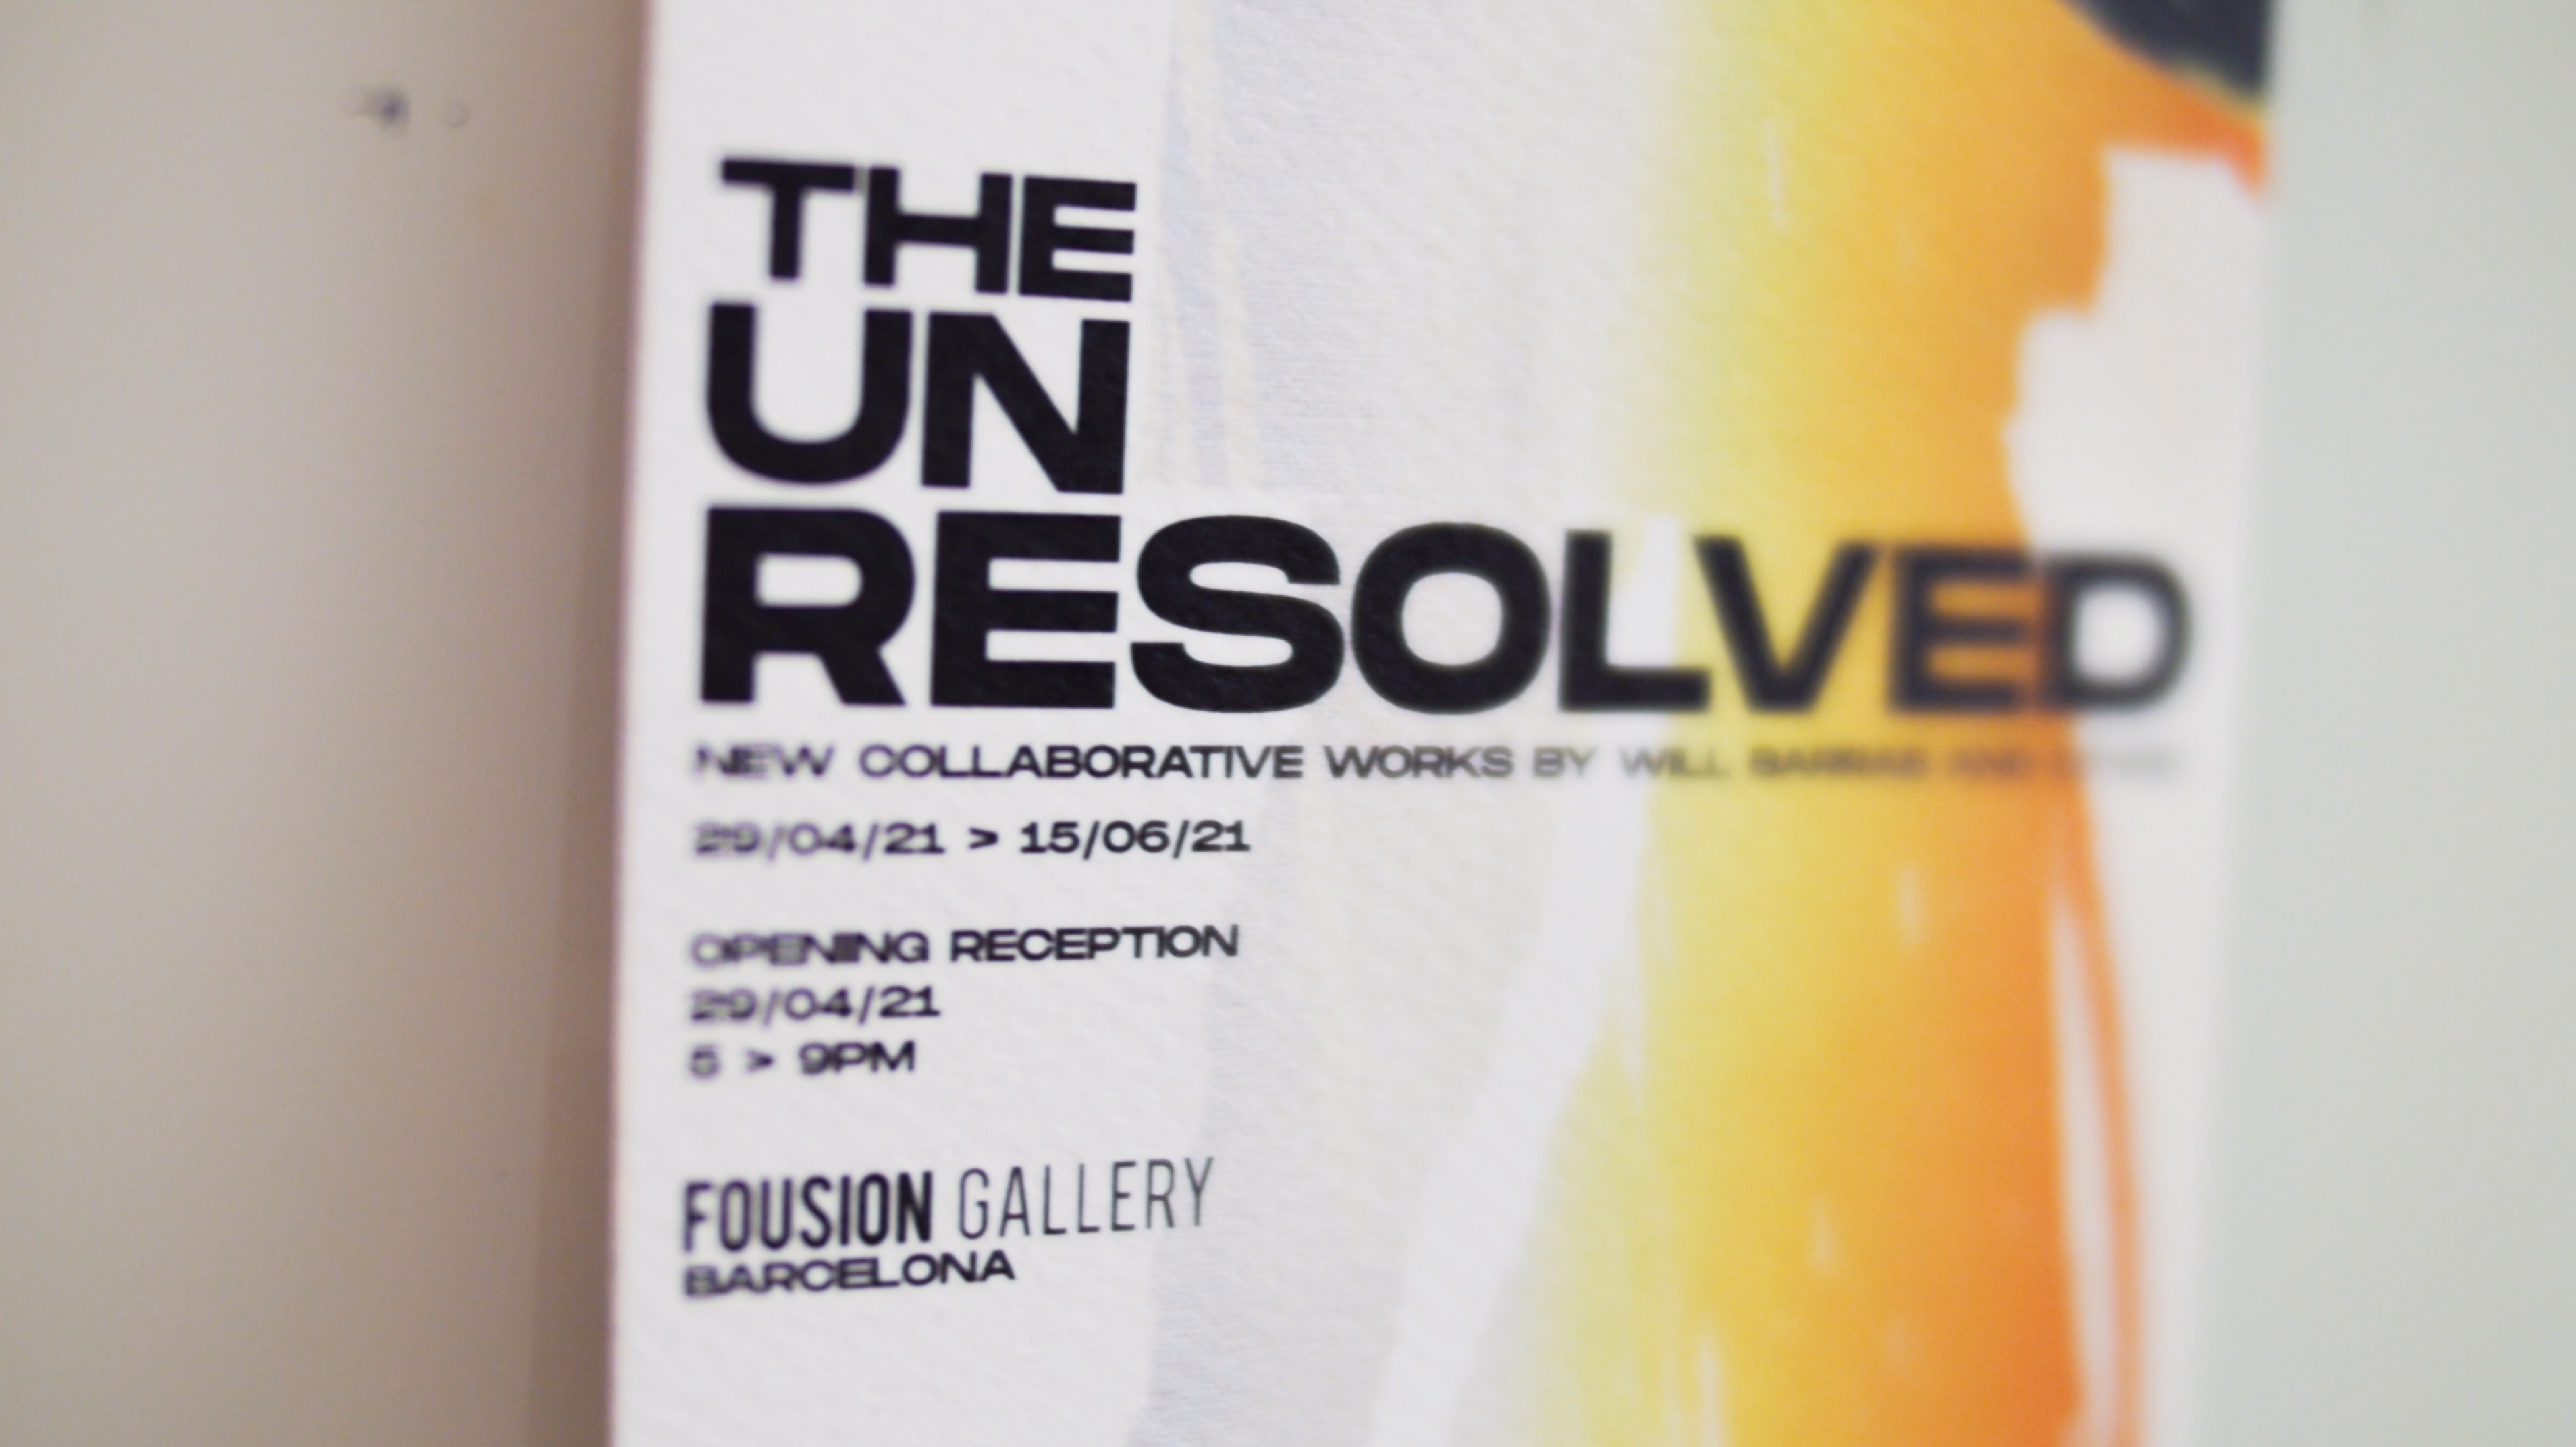 The Unresolved at Fousion Gallery – 2021 – Flyer